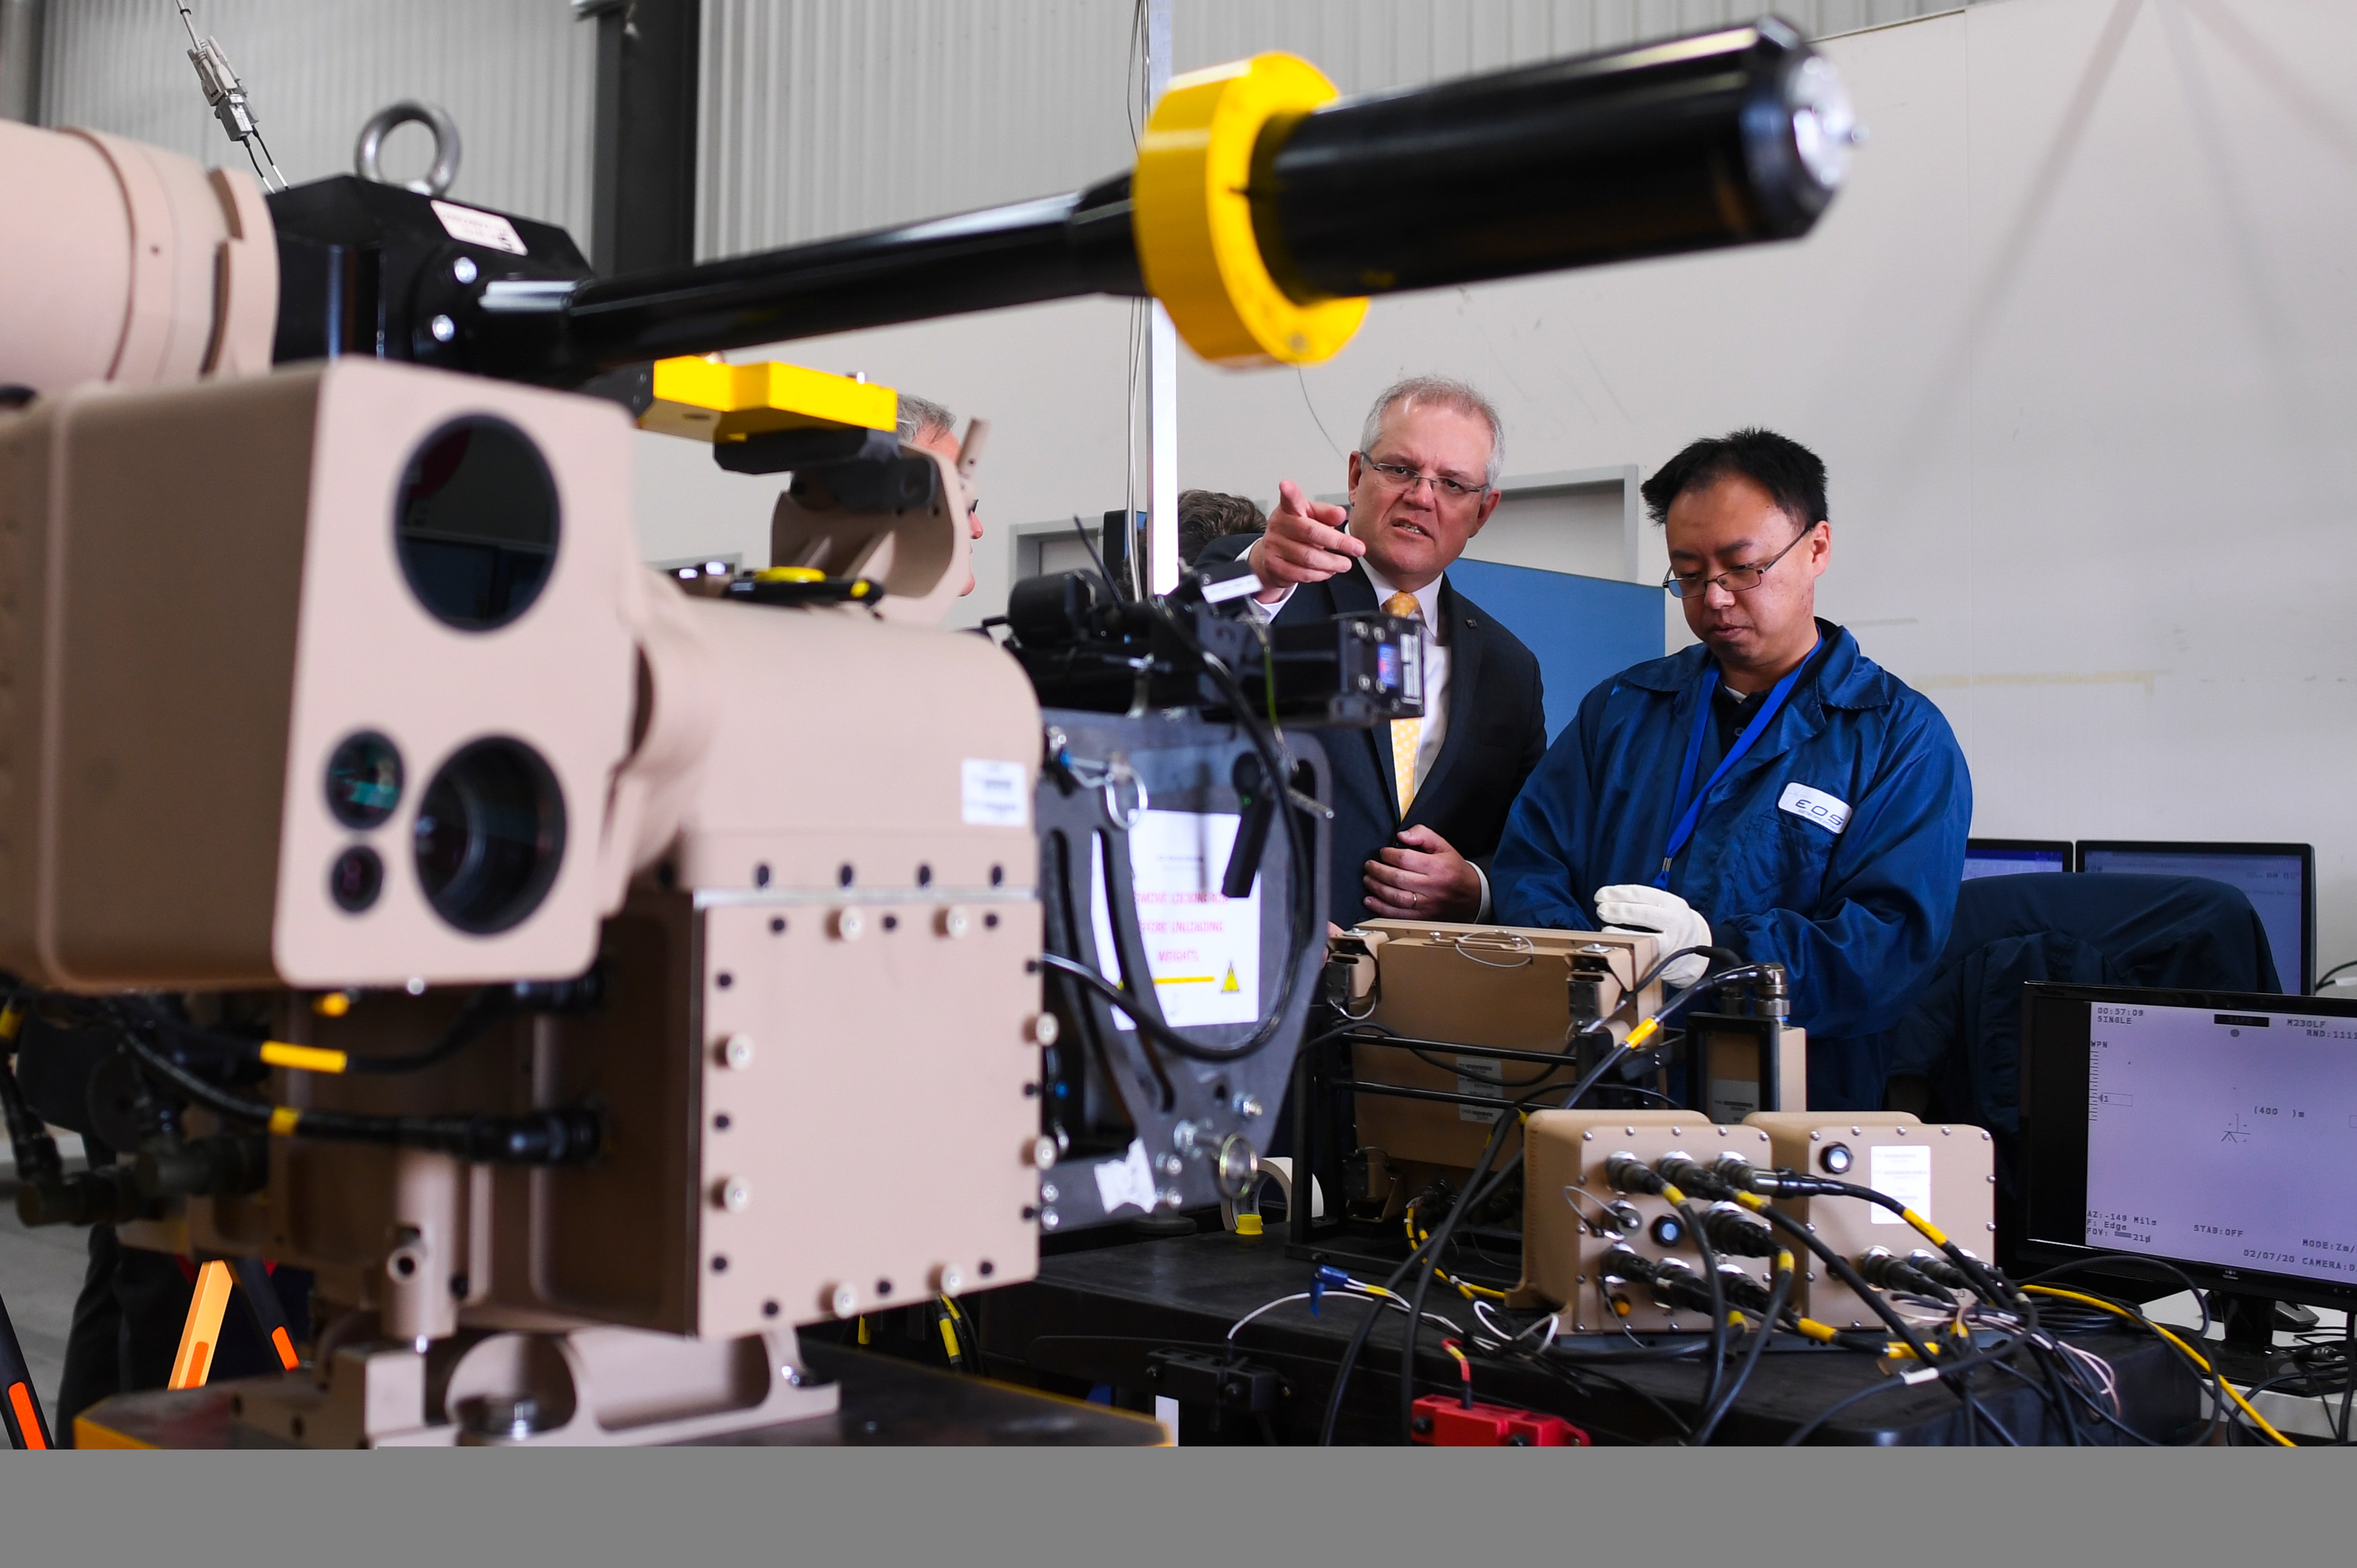 Australian Prime Minister looks at defence machinery during a visit to Electro Optics Systems (EOS) in Canberra.